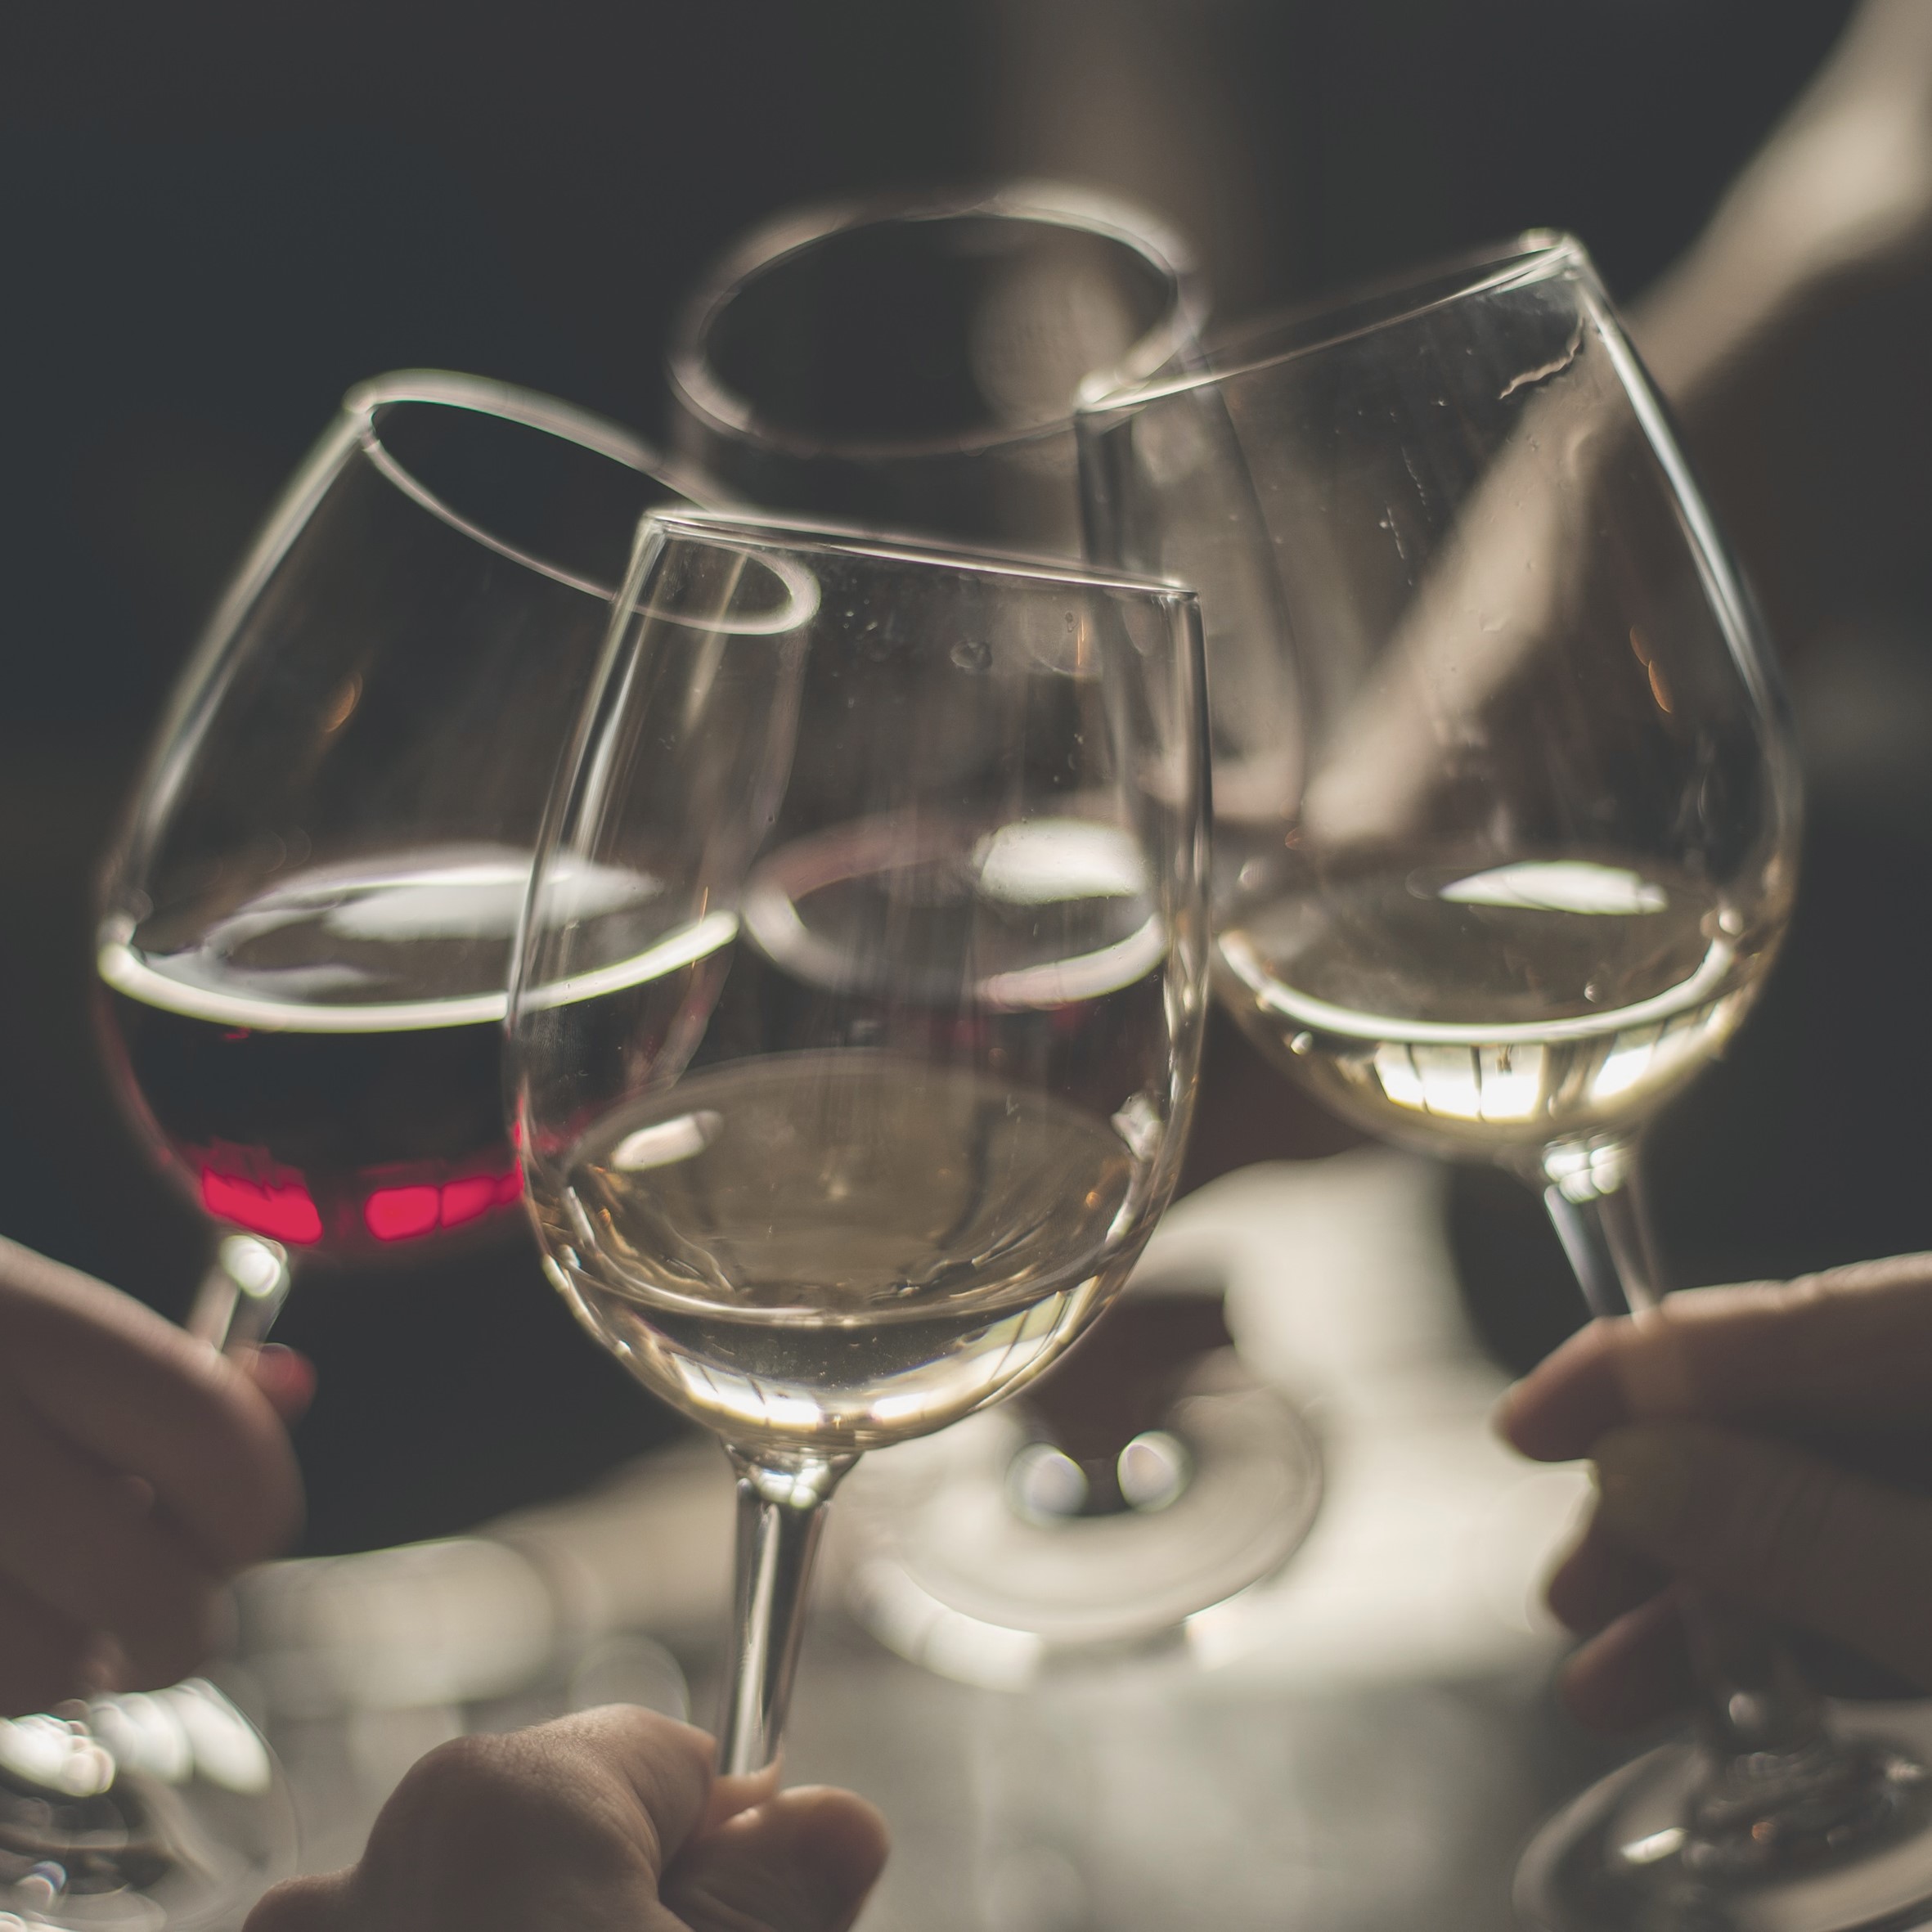 UK On trade - Wine Intelligence’s industry predictions for 2021